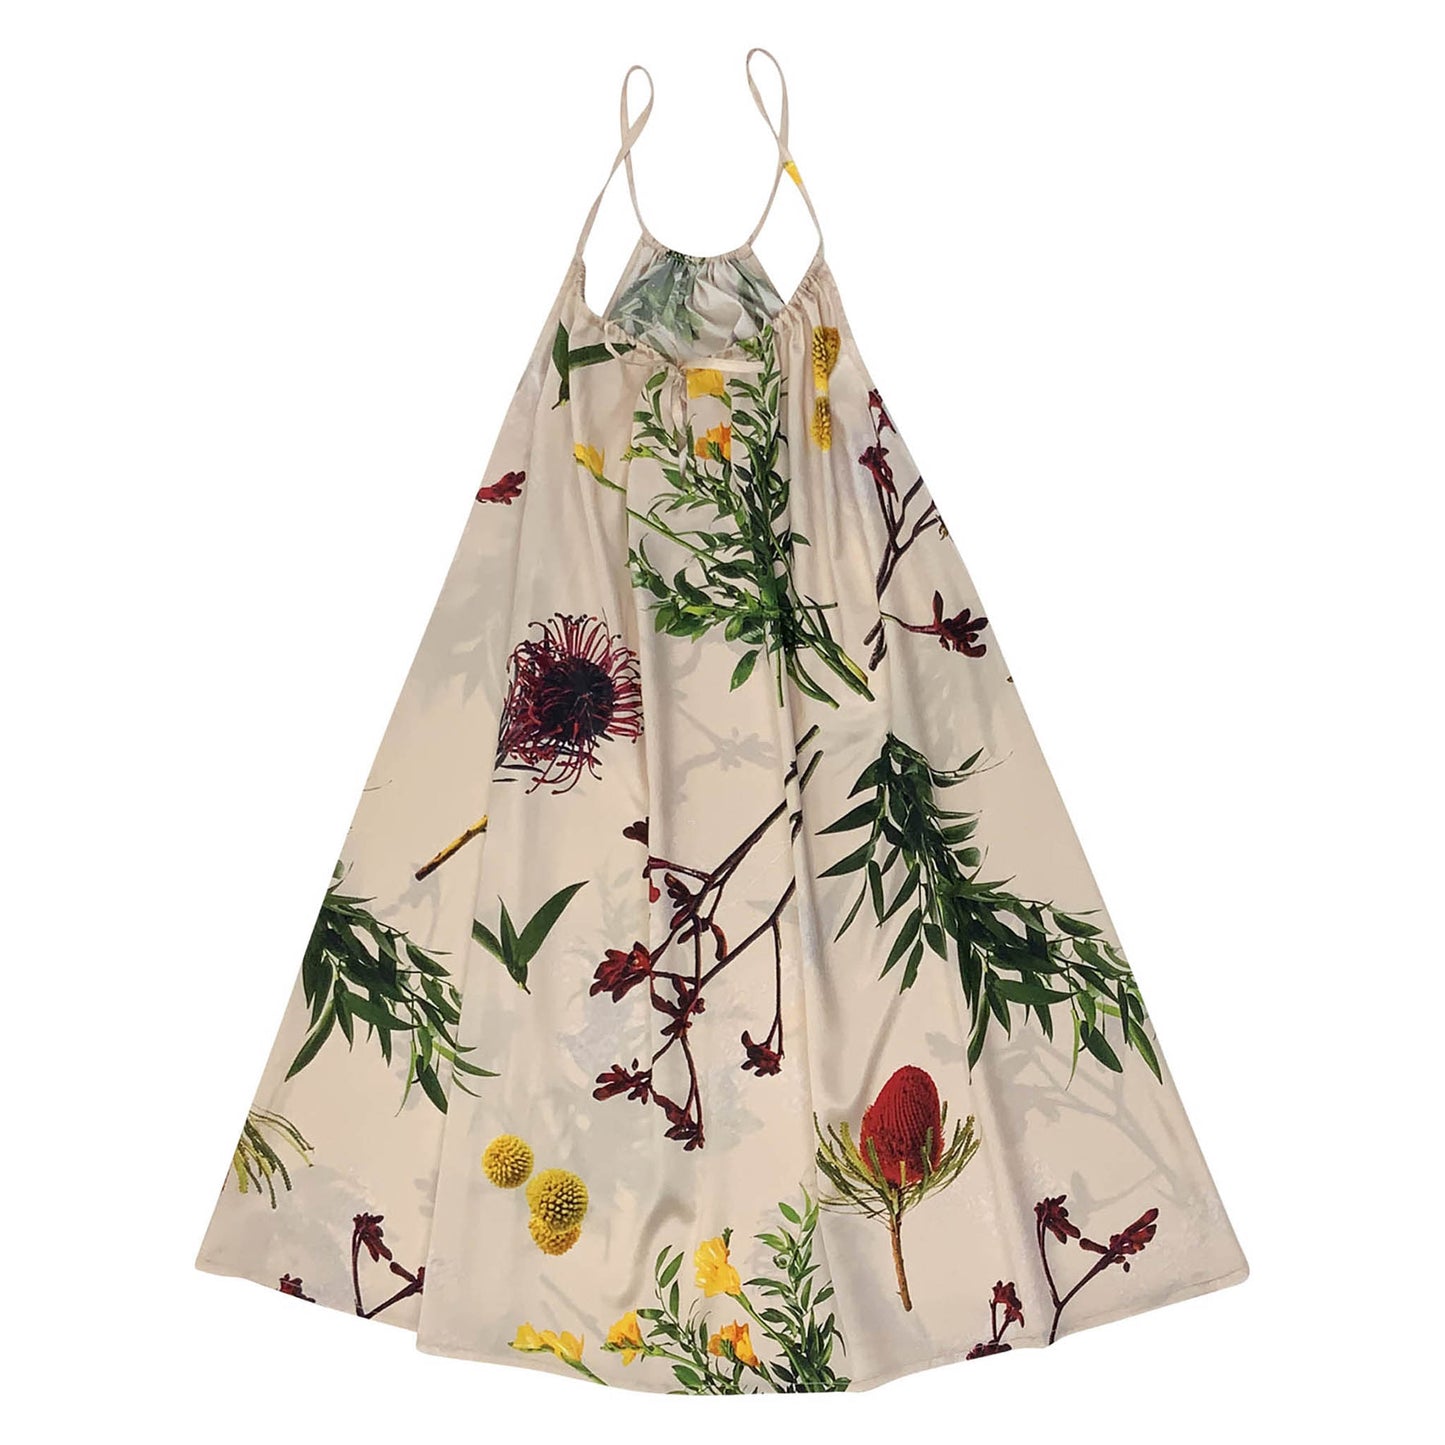 The Flying Flower chemise is cut from Mulberry silk with an easy, relaxed cut with a unique designer print.